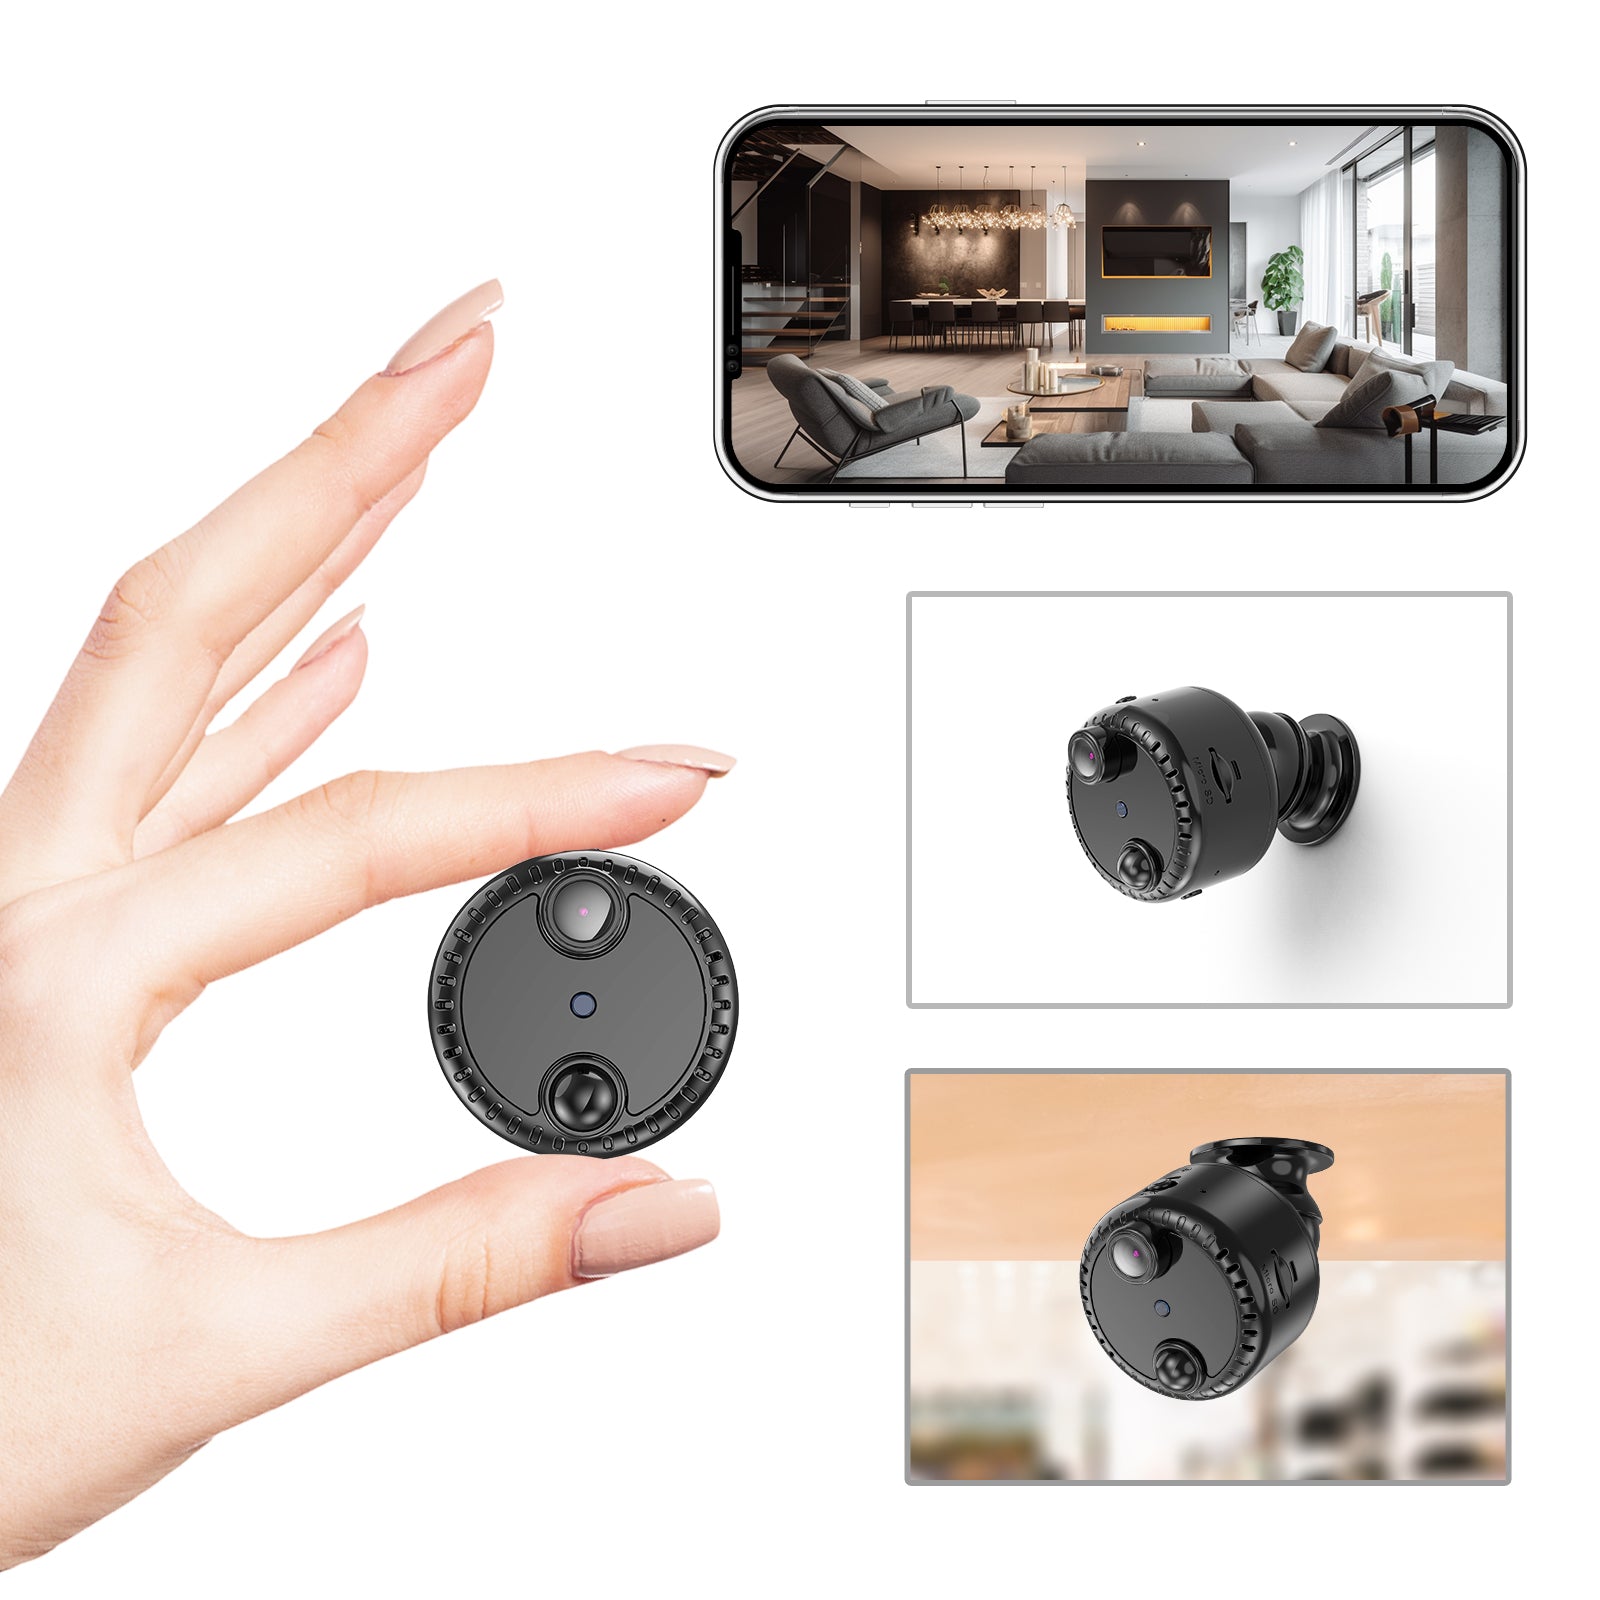 VIDCASTIVE R10 Mini Spy Hidden Camera 4K Wireless WiFi Small Nanny Cam Portable Indoor Secret Tiny Video Security Cameras Up to 100 Days Standby Battery Life Motion Human Detection Night Vision